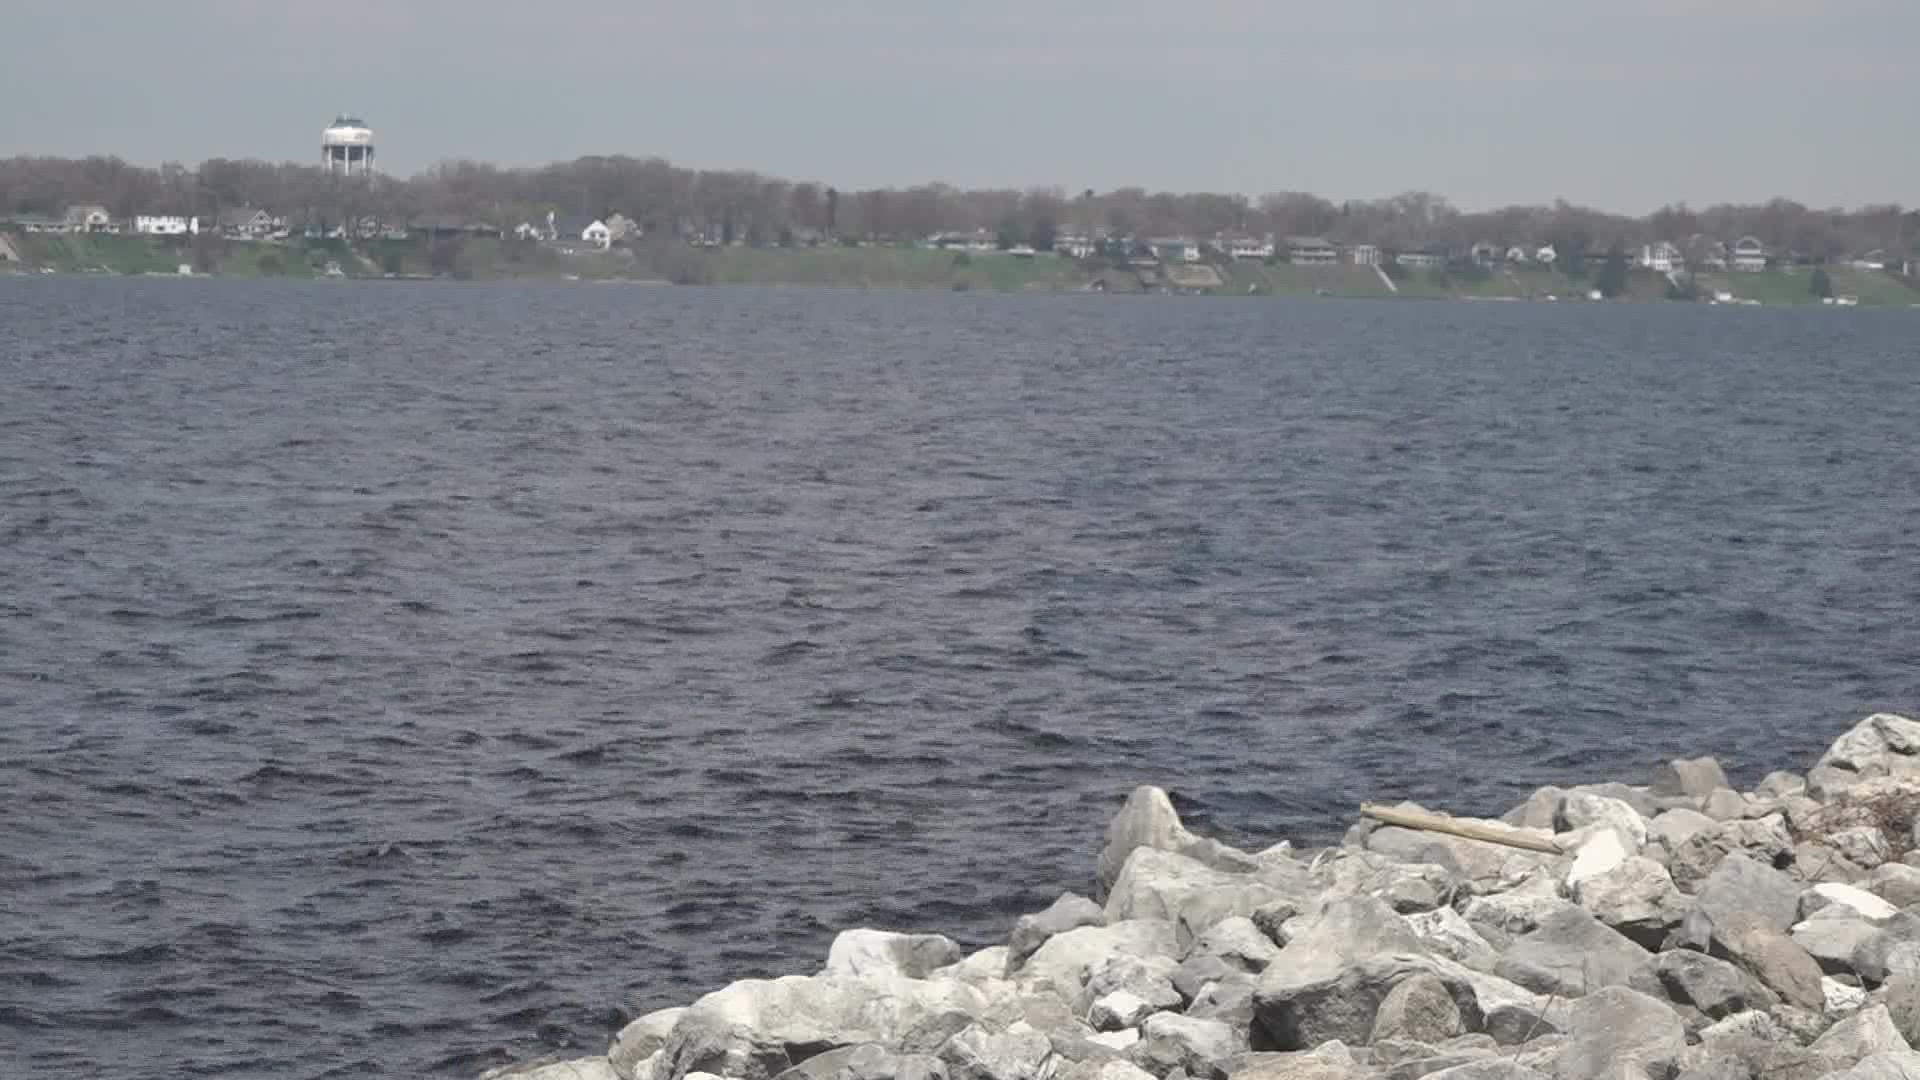 Muskegon Lake and the Kalamazoo River are among the areas of concern receiving the most attention.